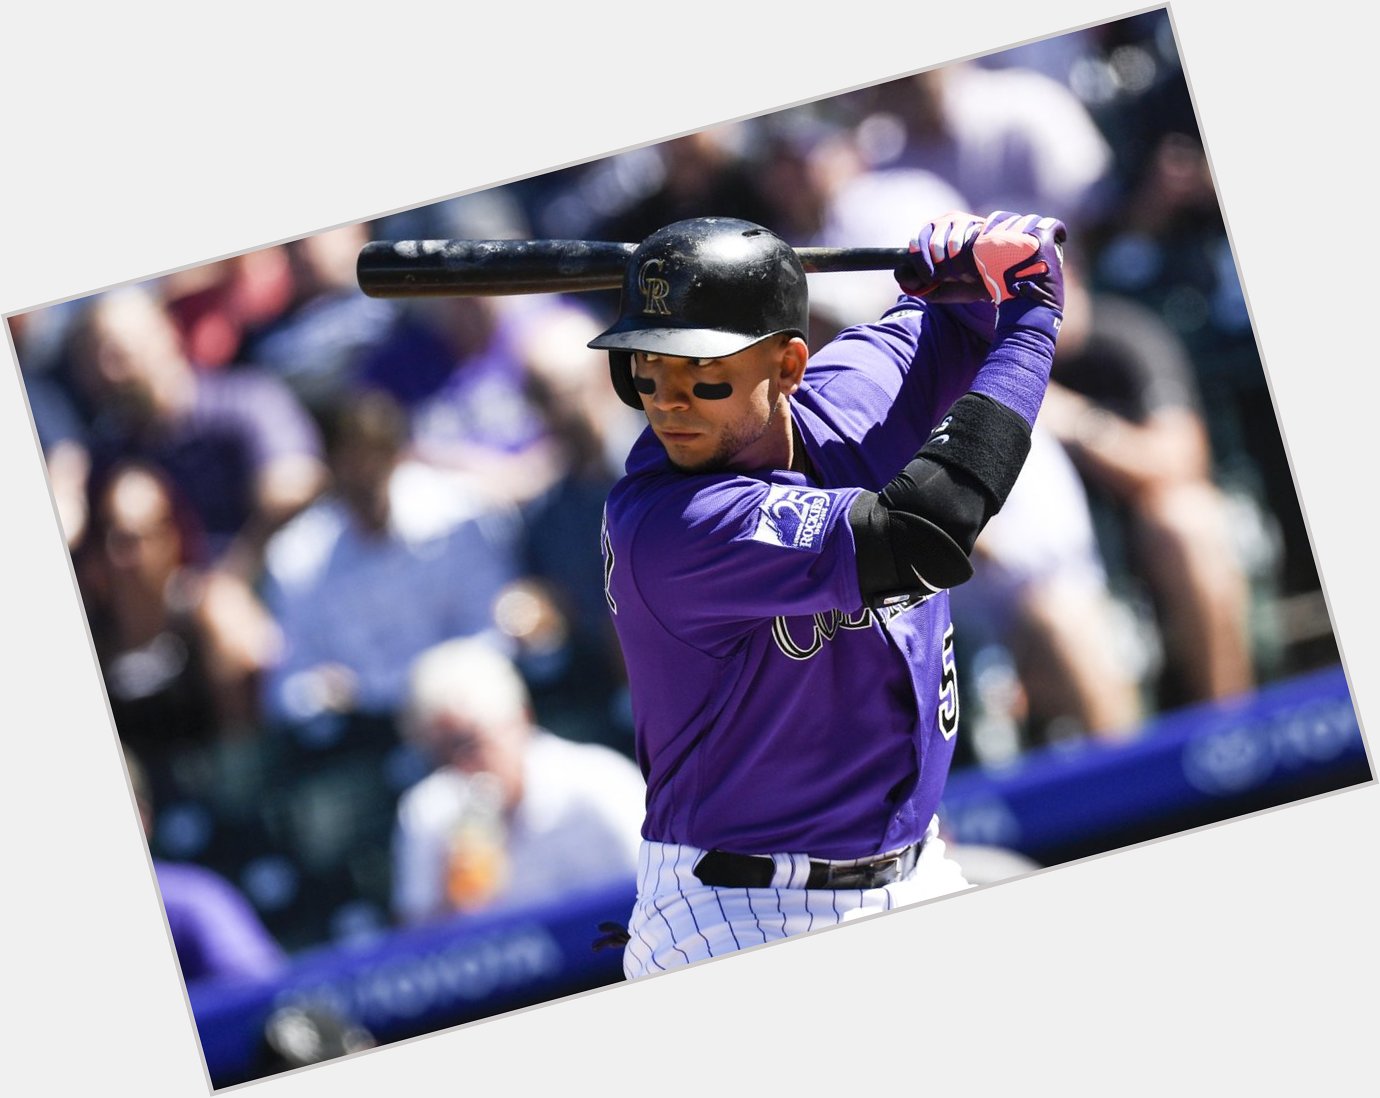 Wishing a happy birthday to one of the greatest players of all-time, Carlos Gonzalez! 